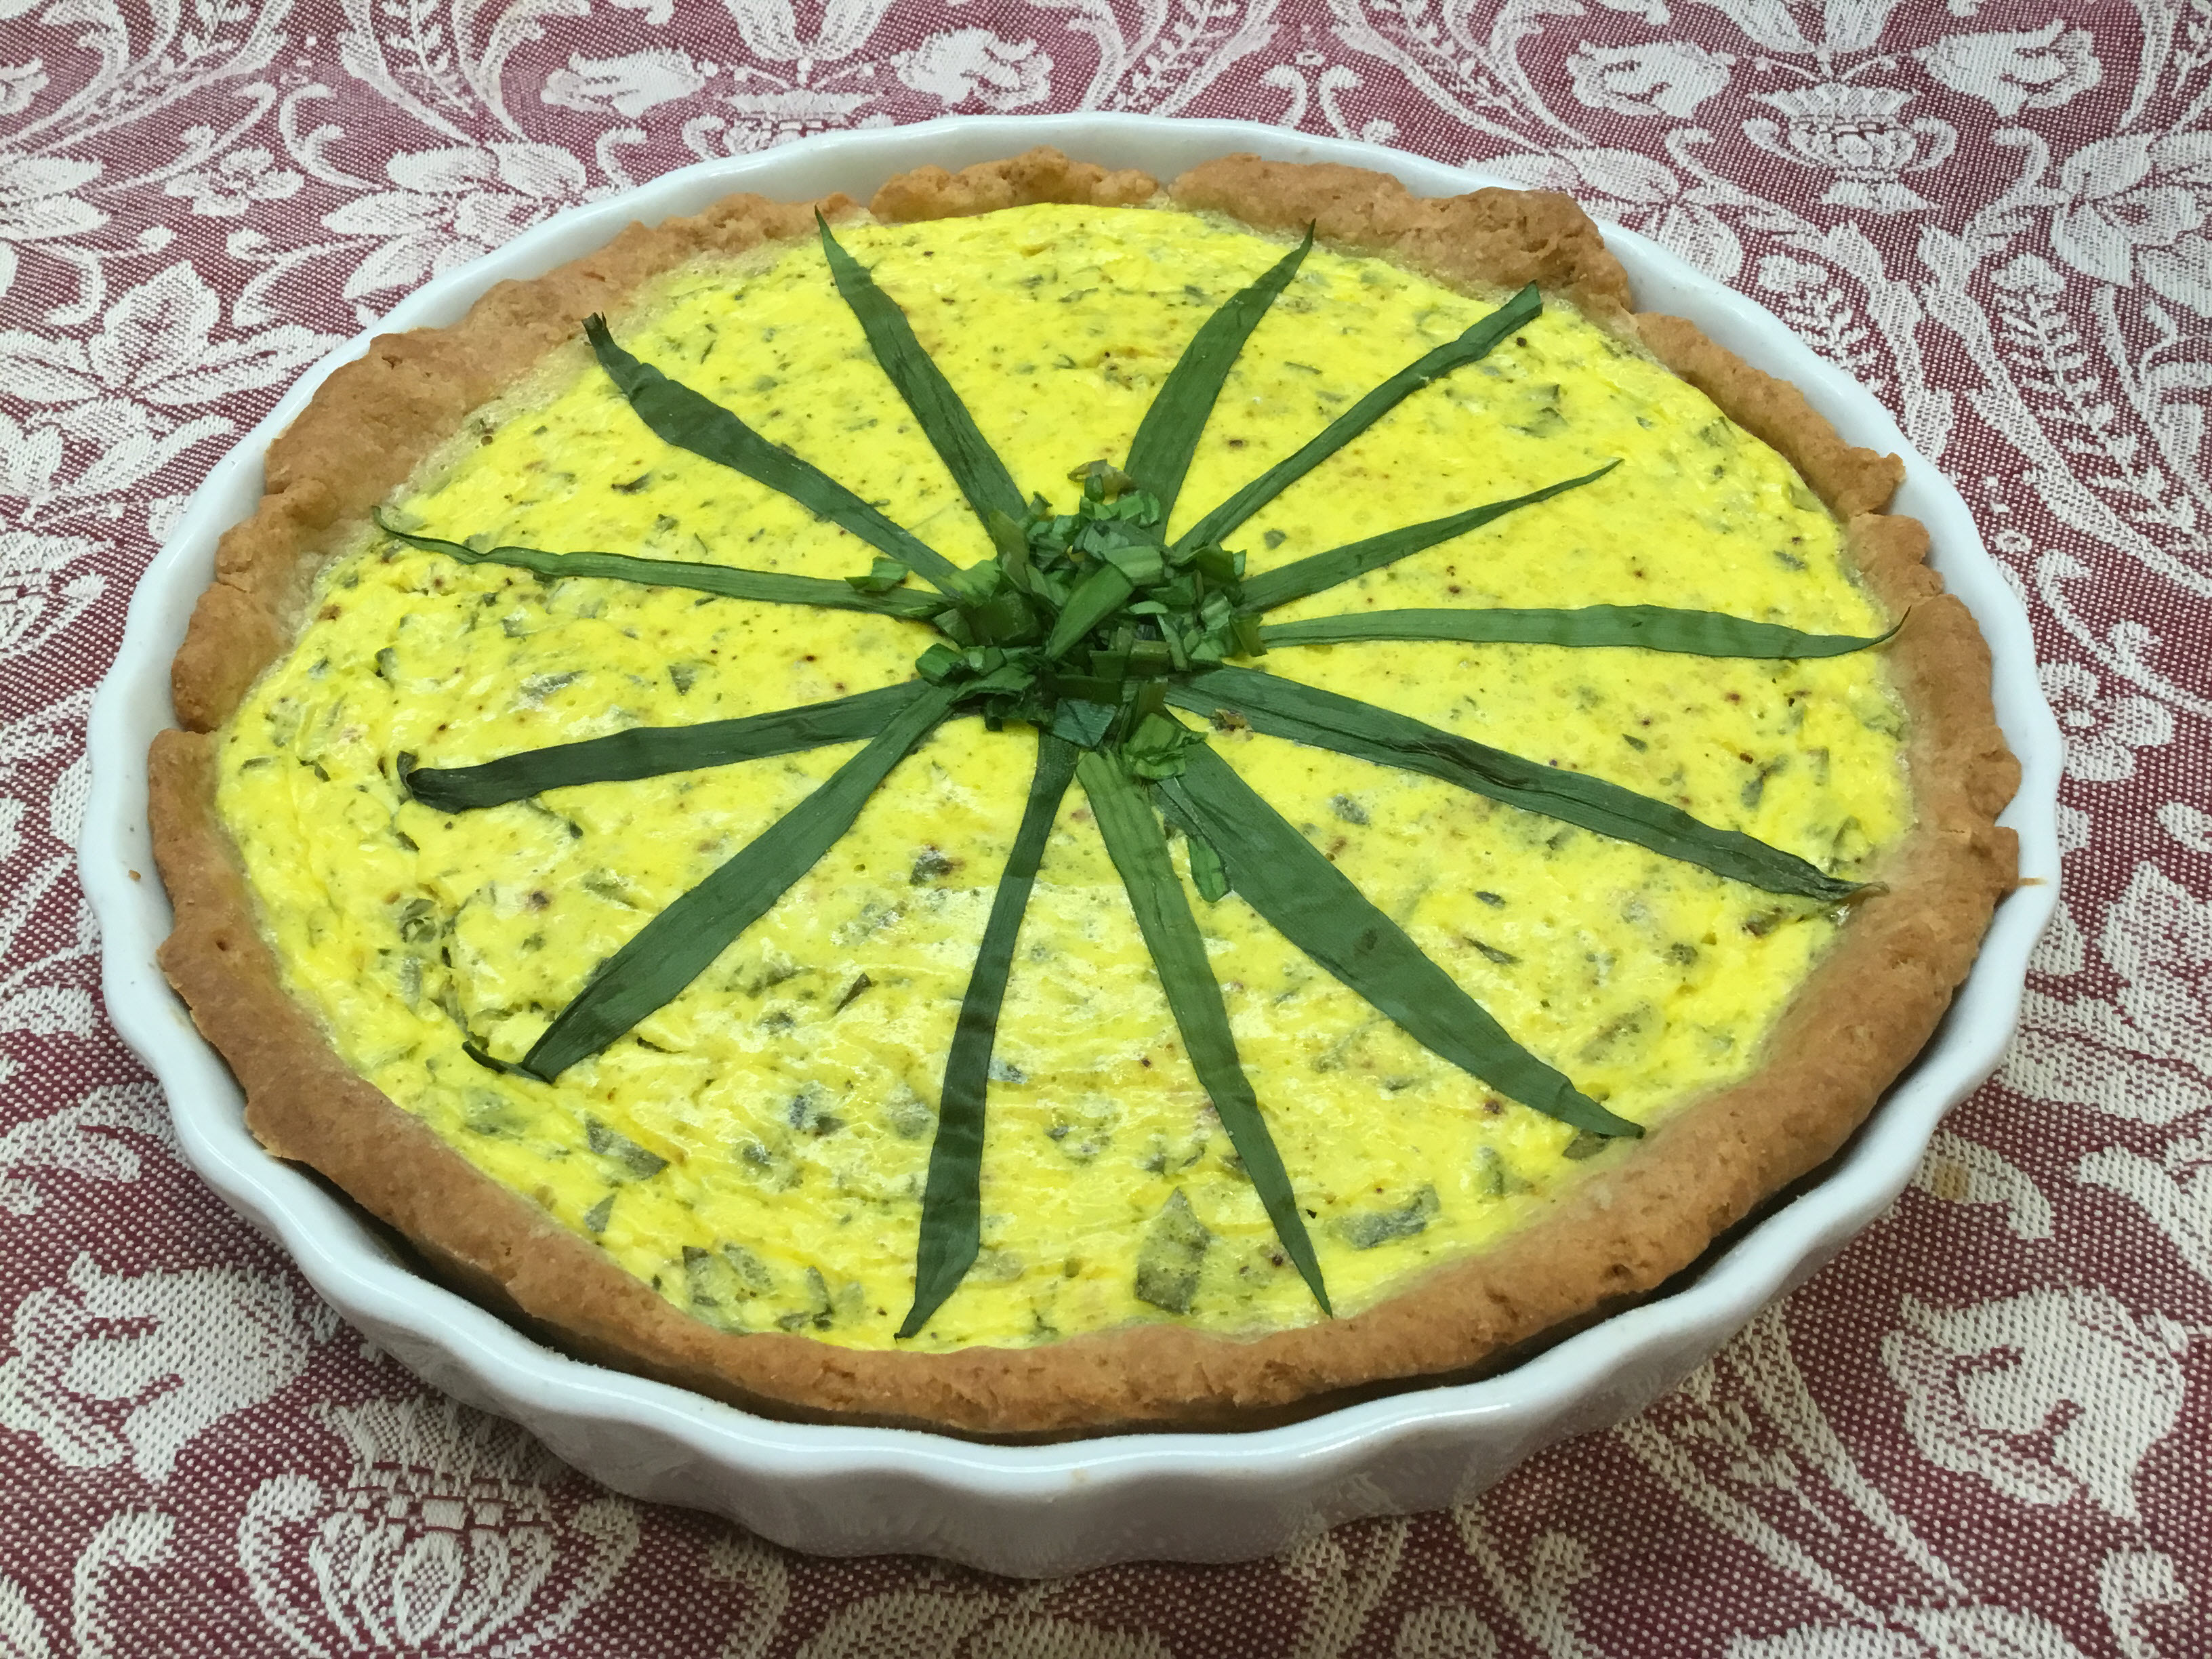 <p>Ramp quiche is a delicious way to enjoy ramps for a springtime breakfast or brunch. As recipe creator nch explains, this recipe uses only the leaves of ramps, which is the sustainable way to pick them &mdash; wild ramp bulbs take years to grow back. </p>
                          